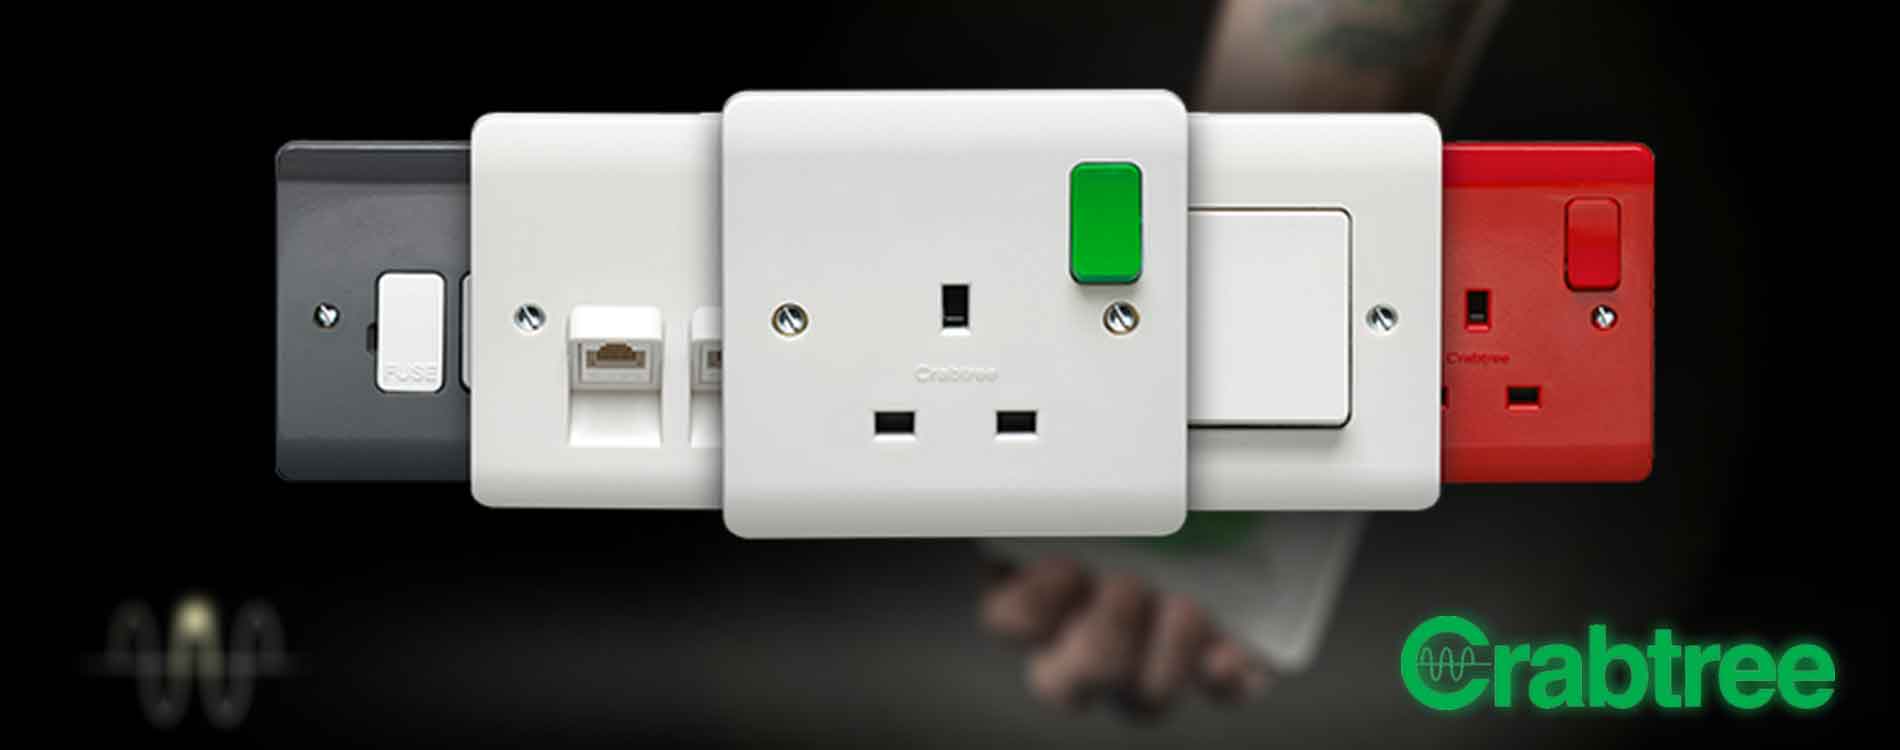 Crabtree acts on INSTINCT with wiring accessories launch Thumbnail